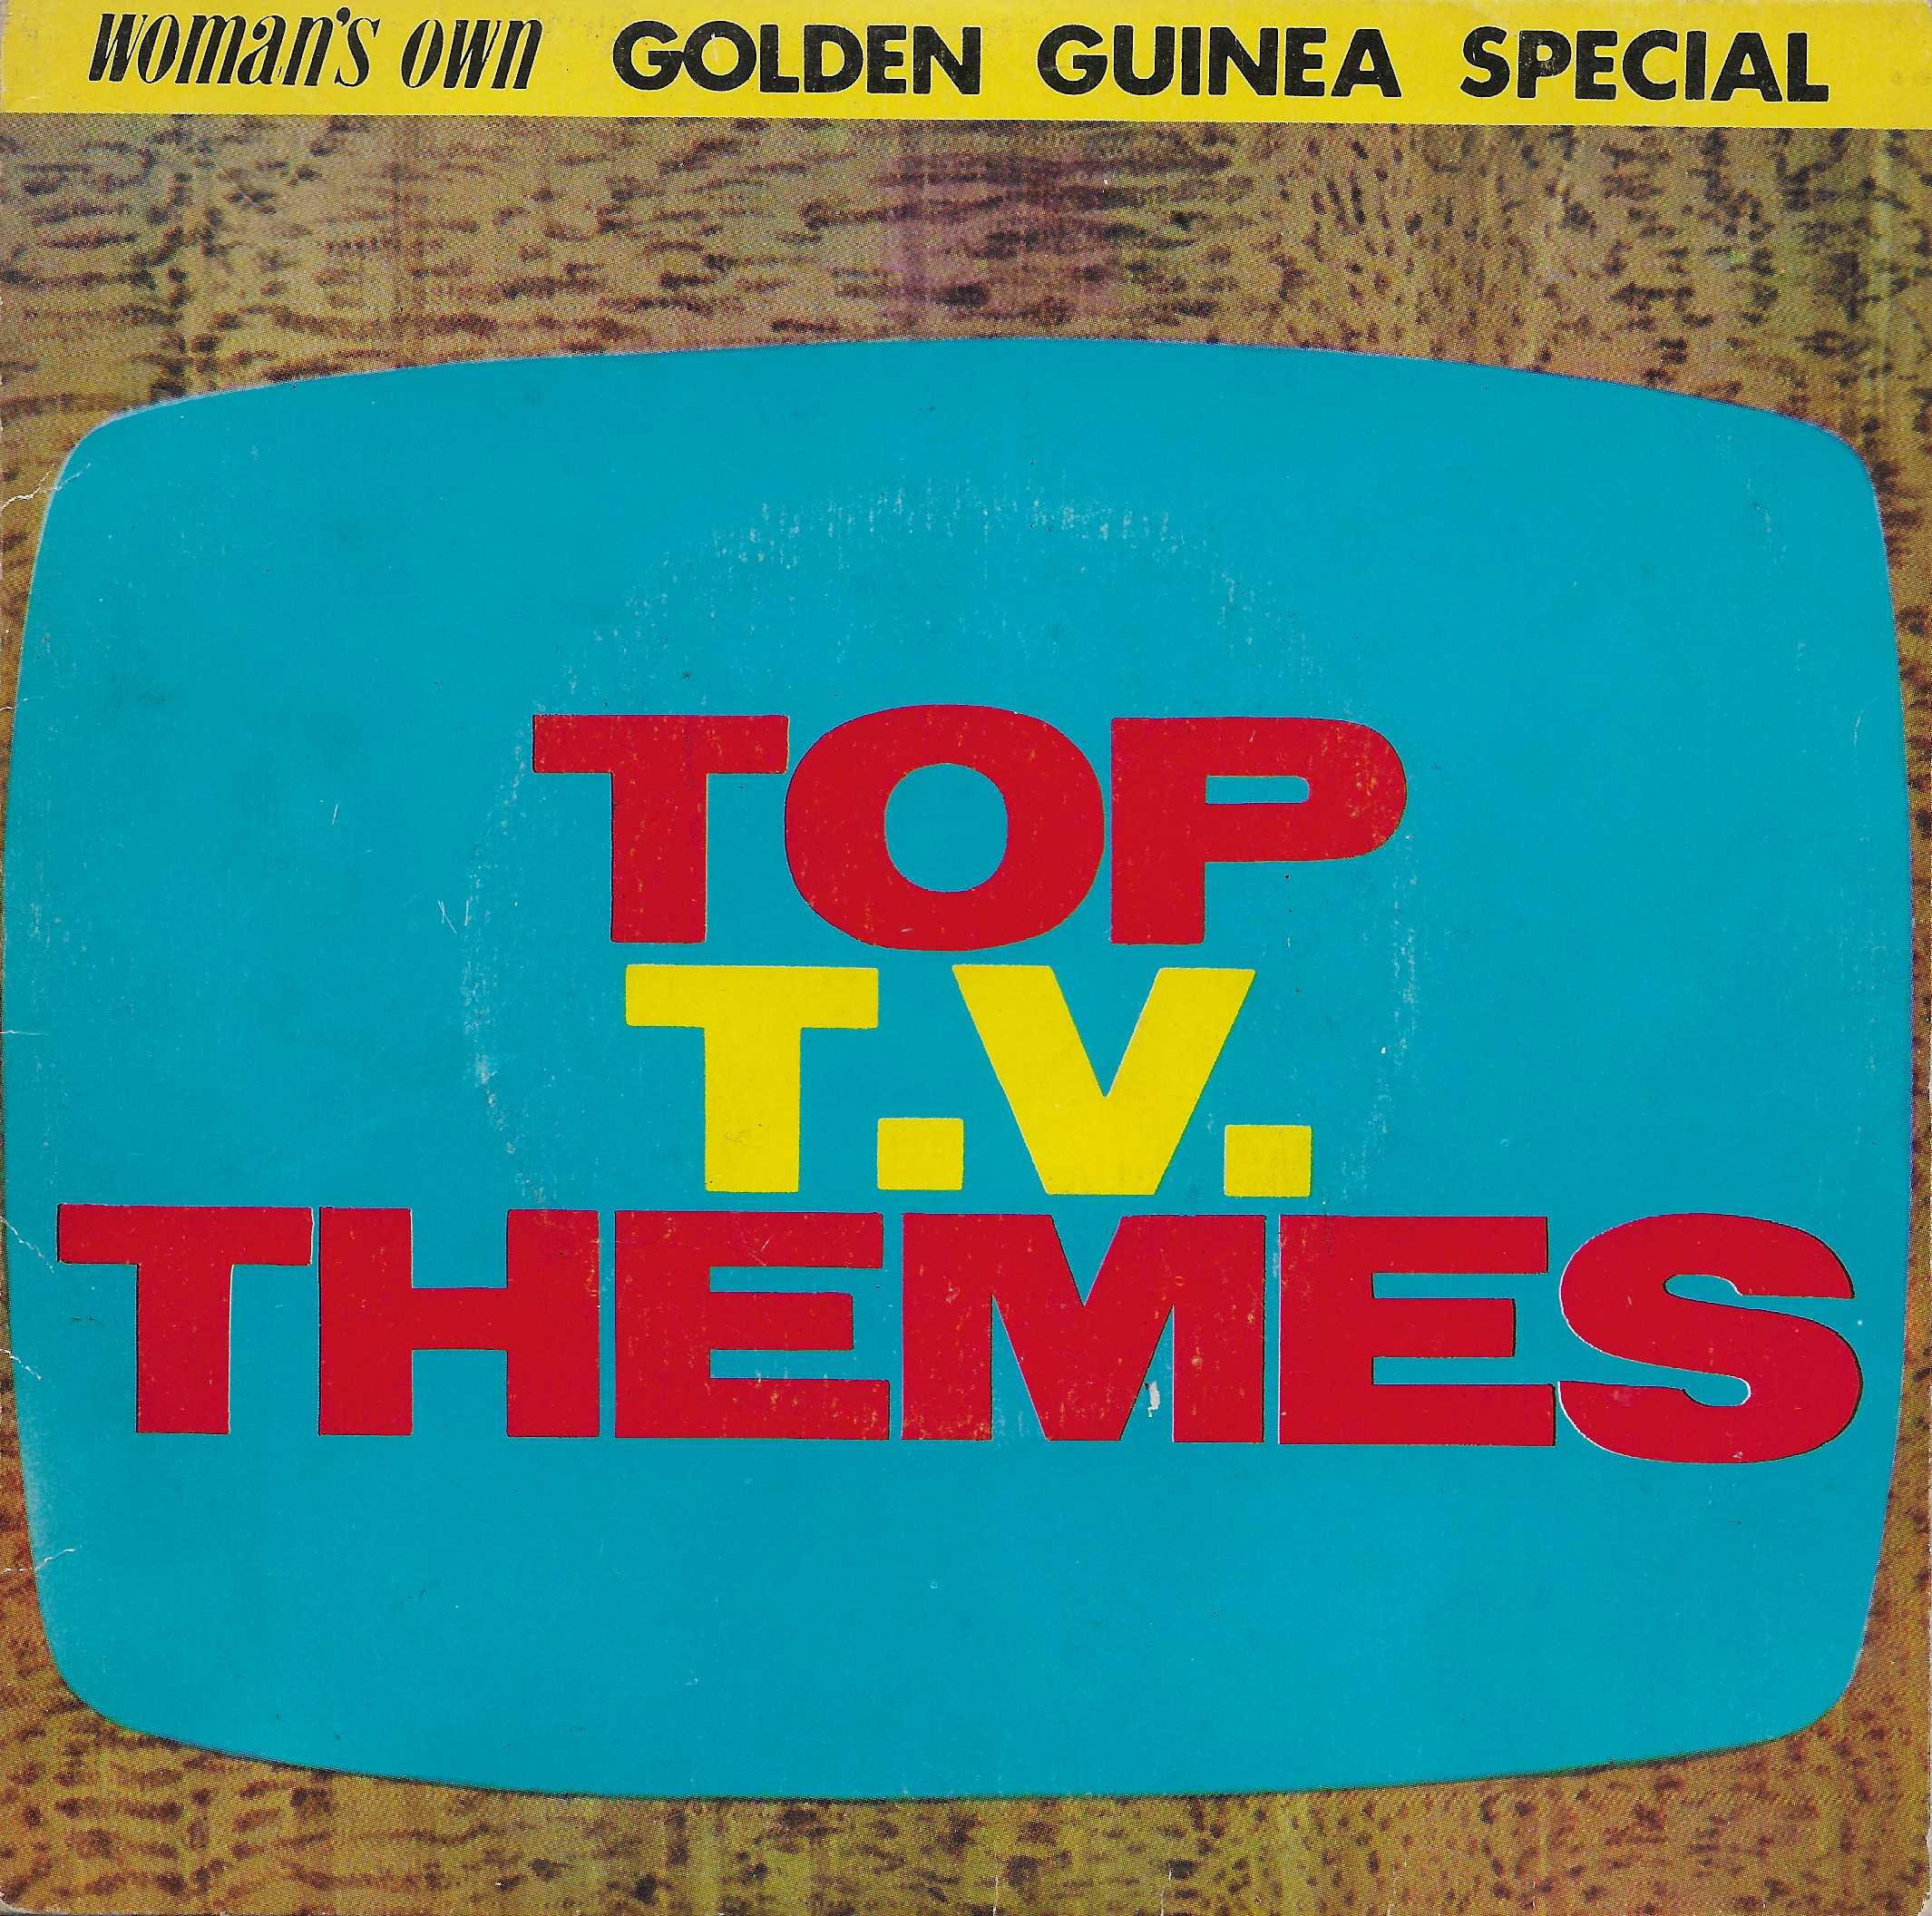 Picture of Top TV themes by artist Various from ITV, Channel 4 and Channel 5 singles library